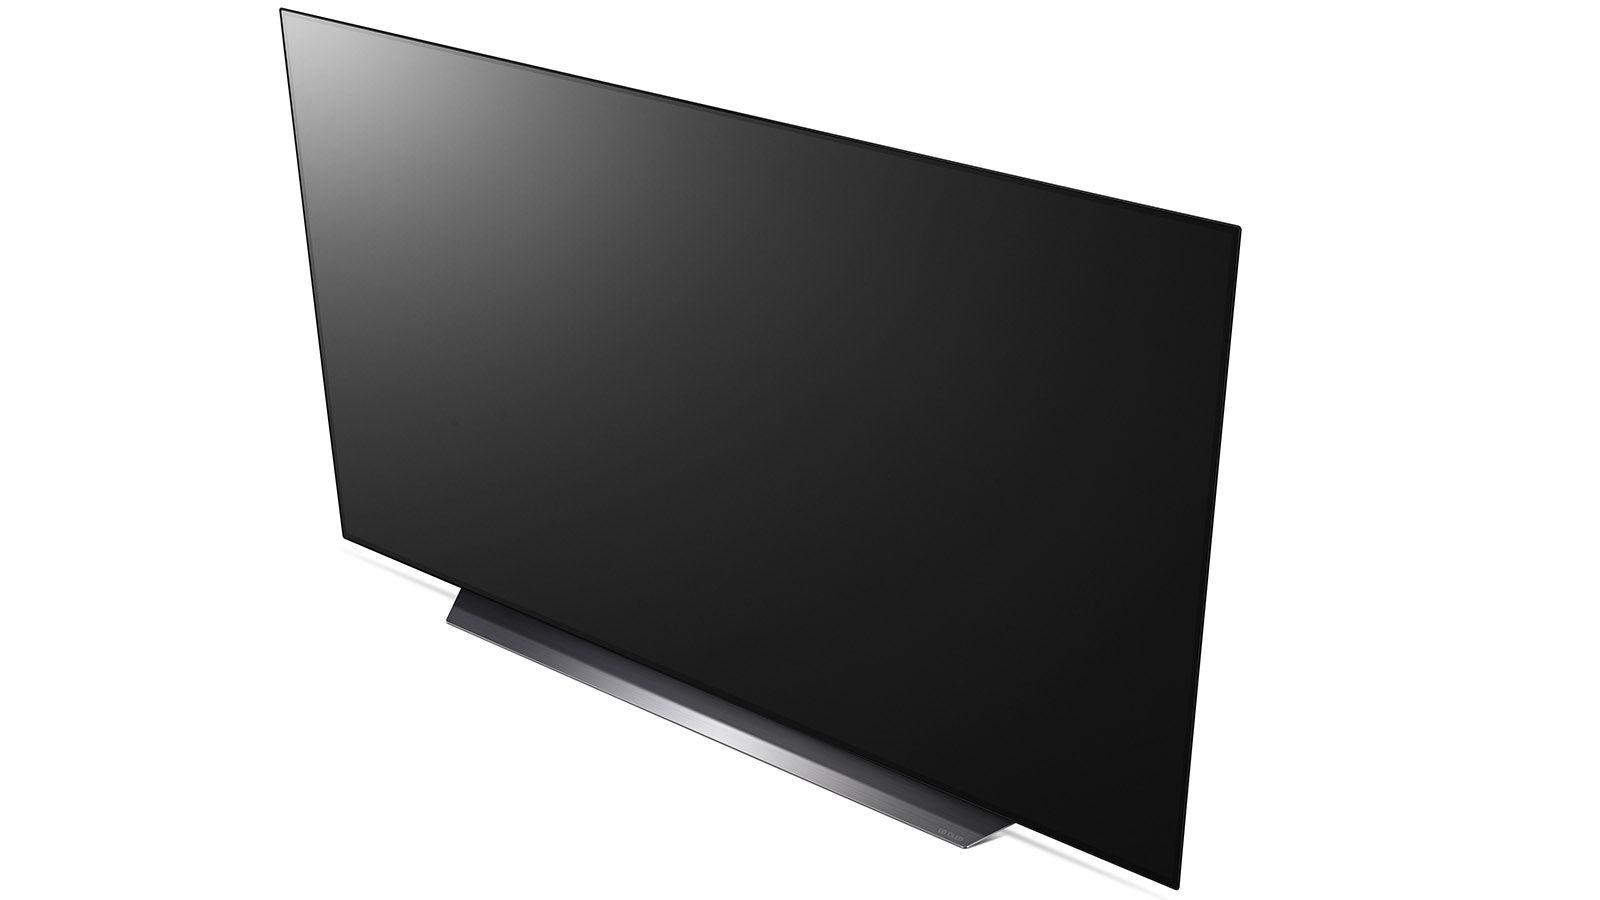 LG OLED C9 TV review image 5